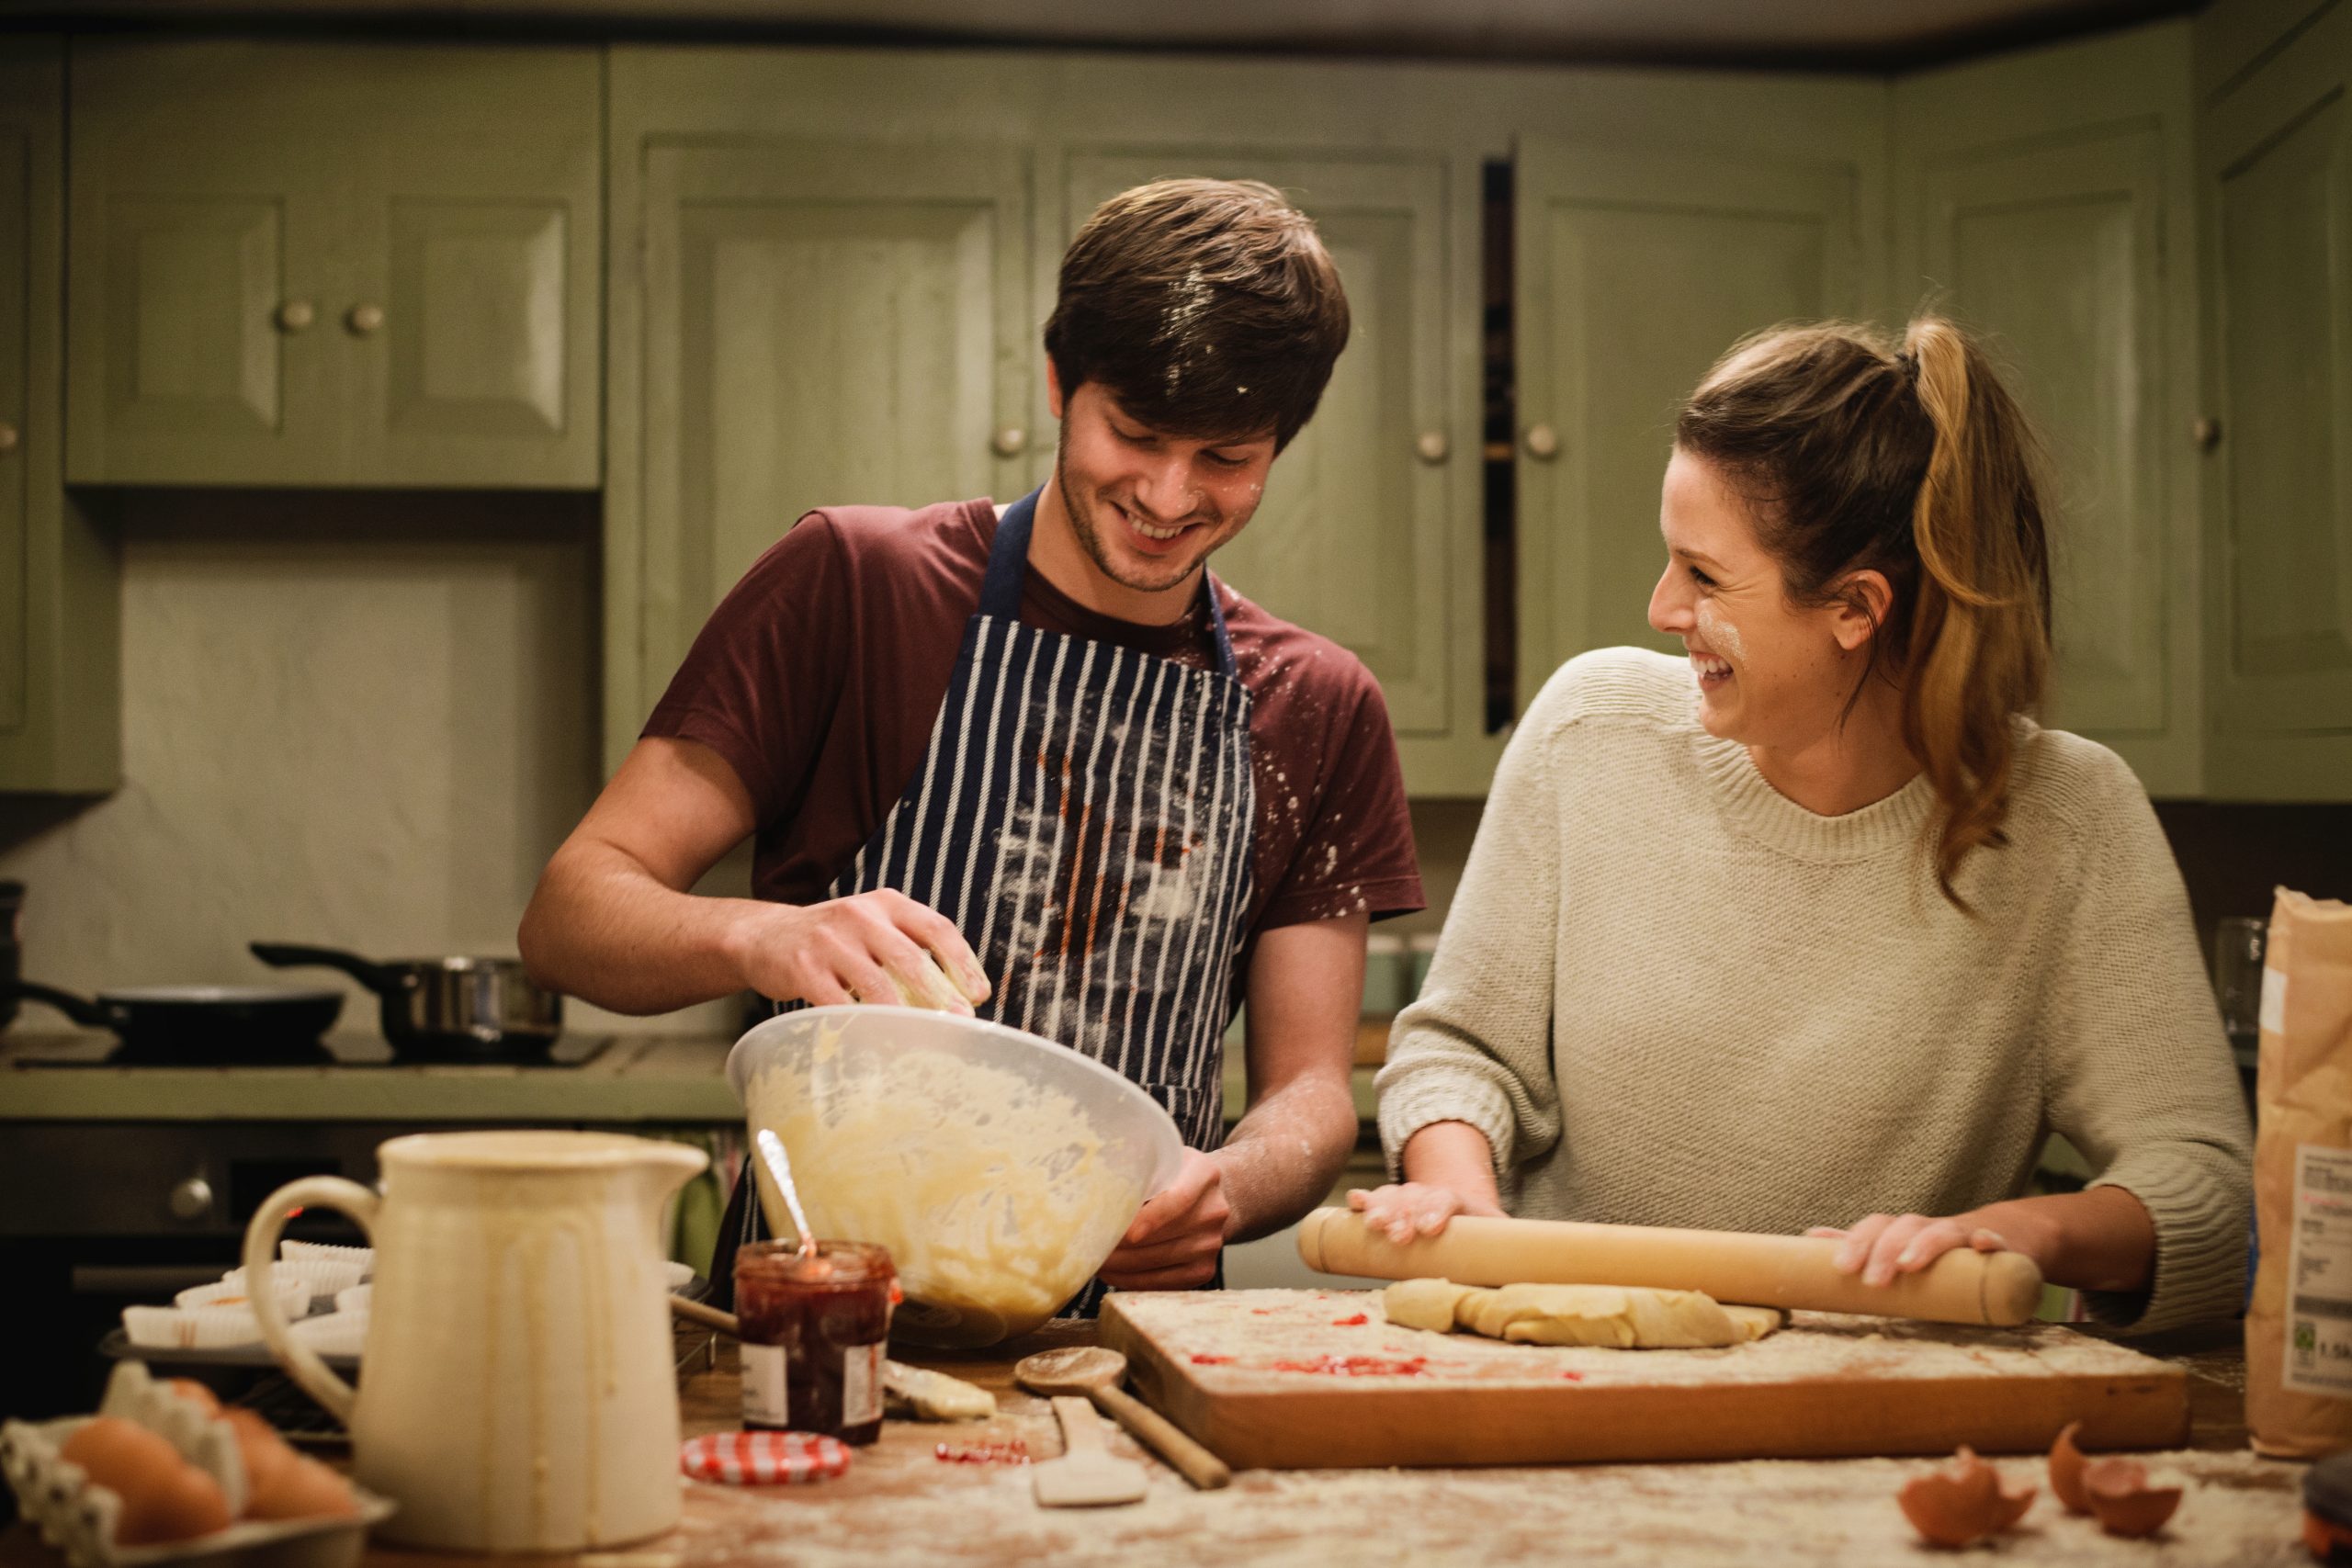 One of the most complex but engaging types of product photography, lifestyle mashes together creative still life and model photography. In this example, a young couple are laughing while cooking. The woman has batter on her face, and the man's apron is covered in cake mix.